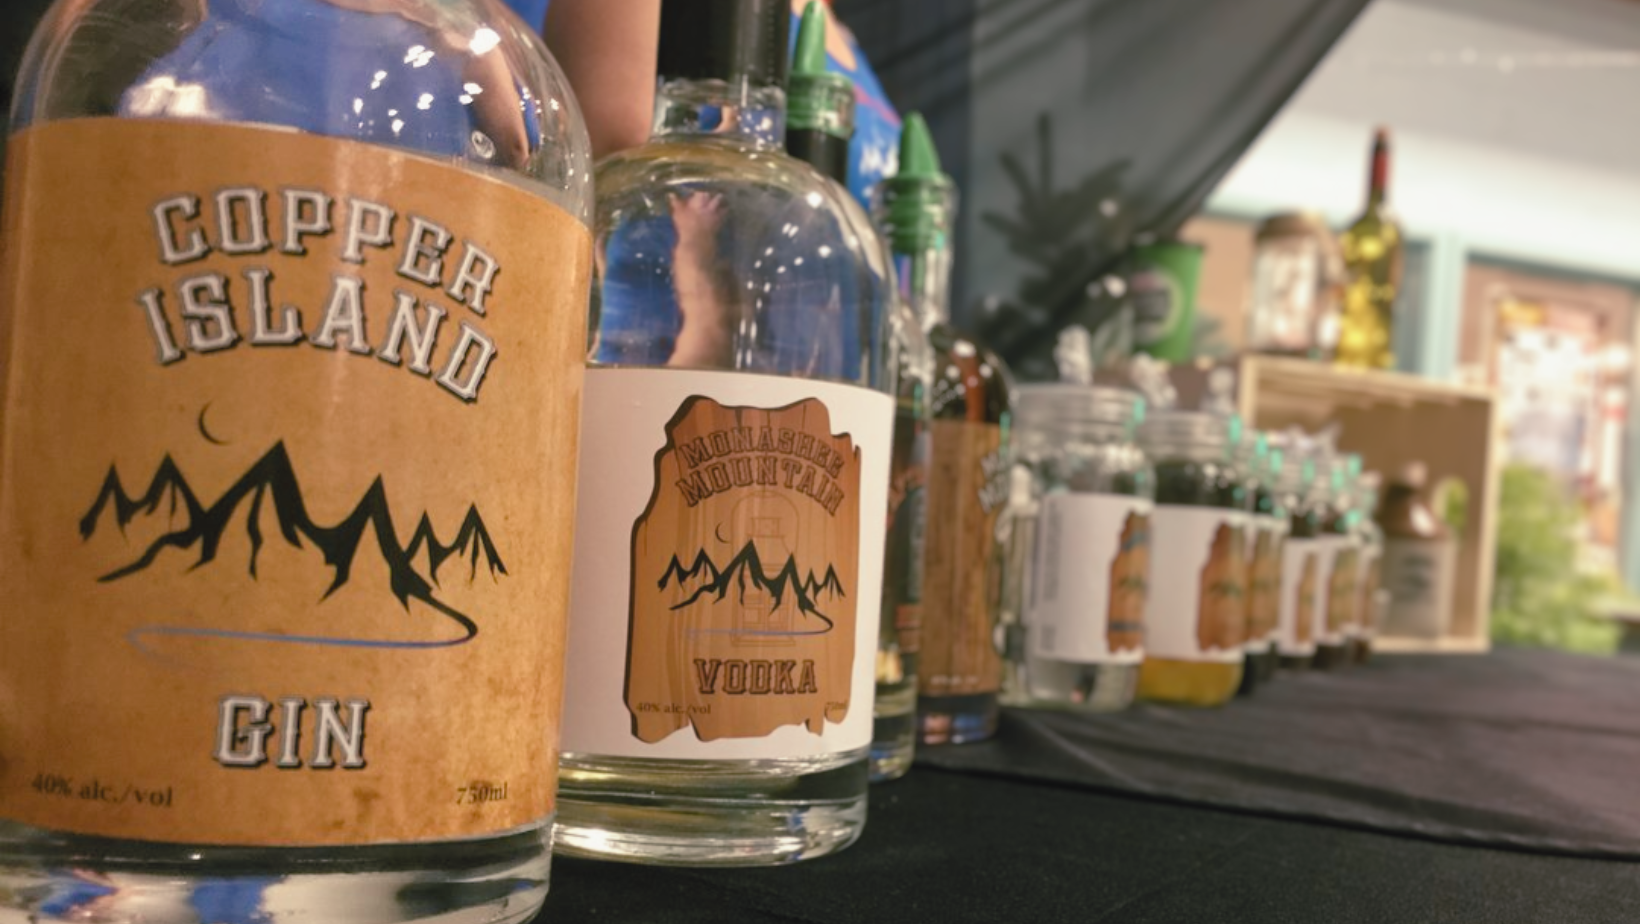 After Dark Distillery: After Dark Distillery is a small-batch craft distillery in Sicamous. We produce award-winning Whiskies, Vodka, Gin, and various flavours of Moonshine. We use local grains to make our products and […]